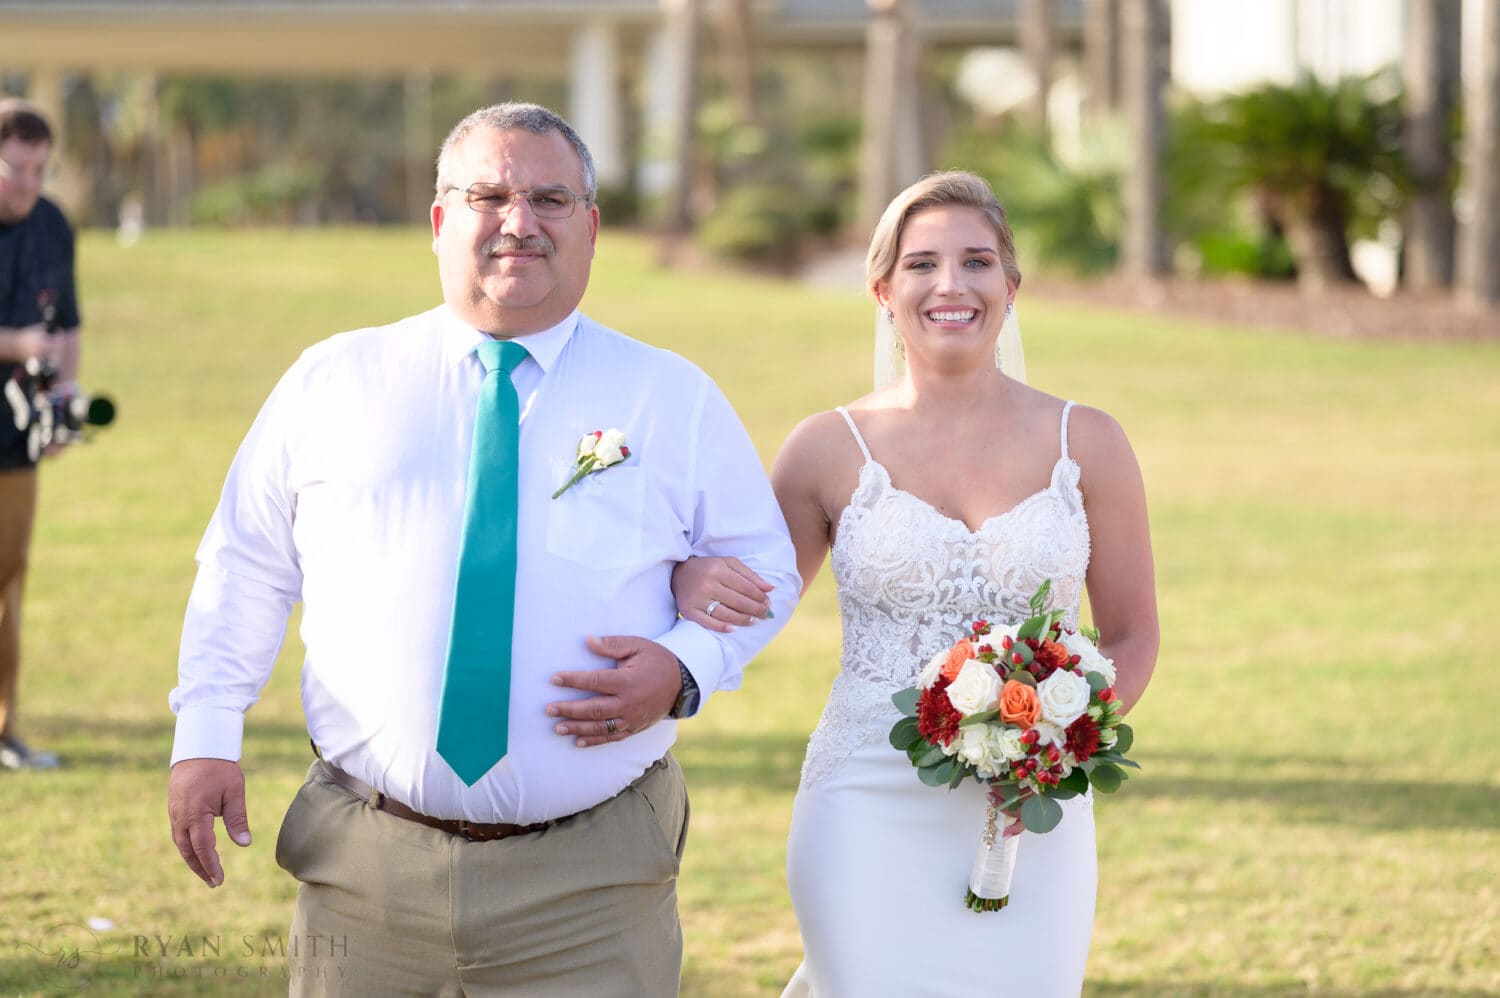 Bride and father walking to the ceremony - Dunes Golf & Beach Club